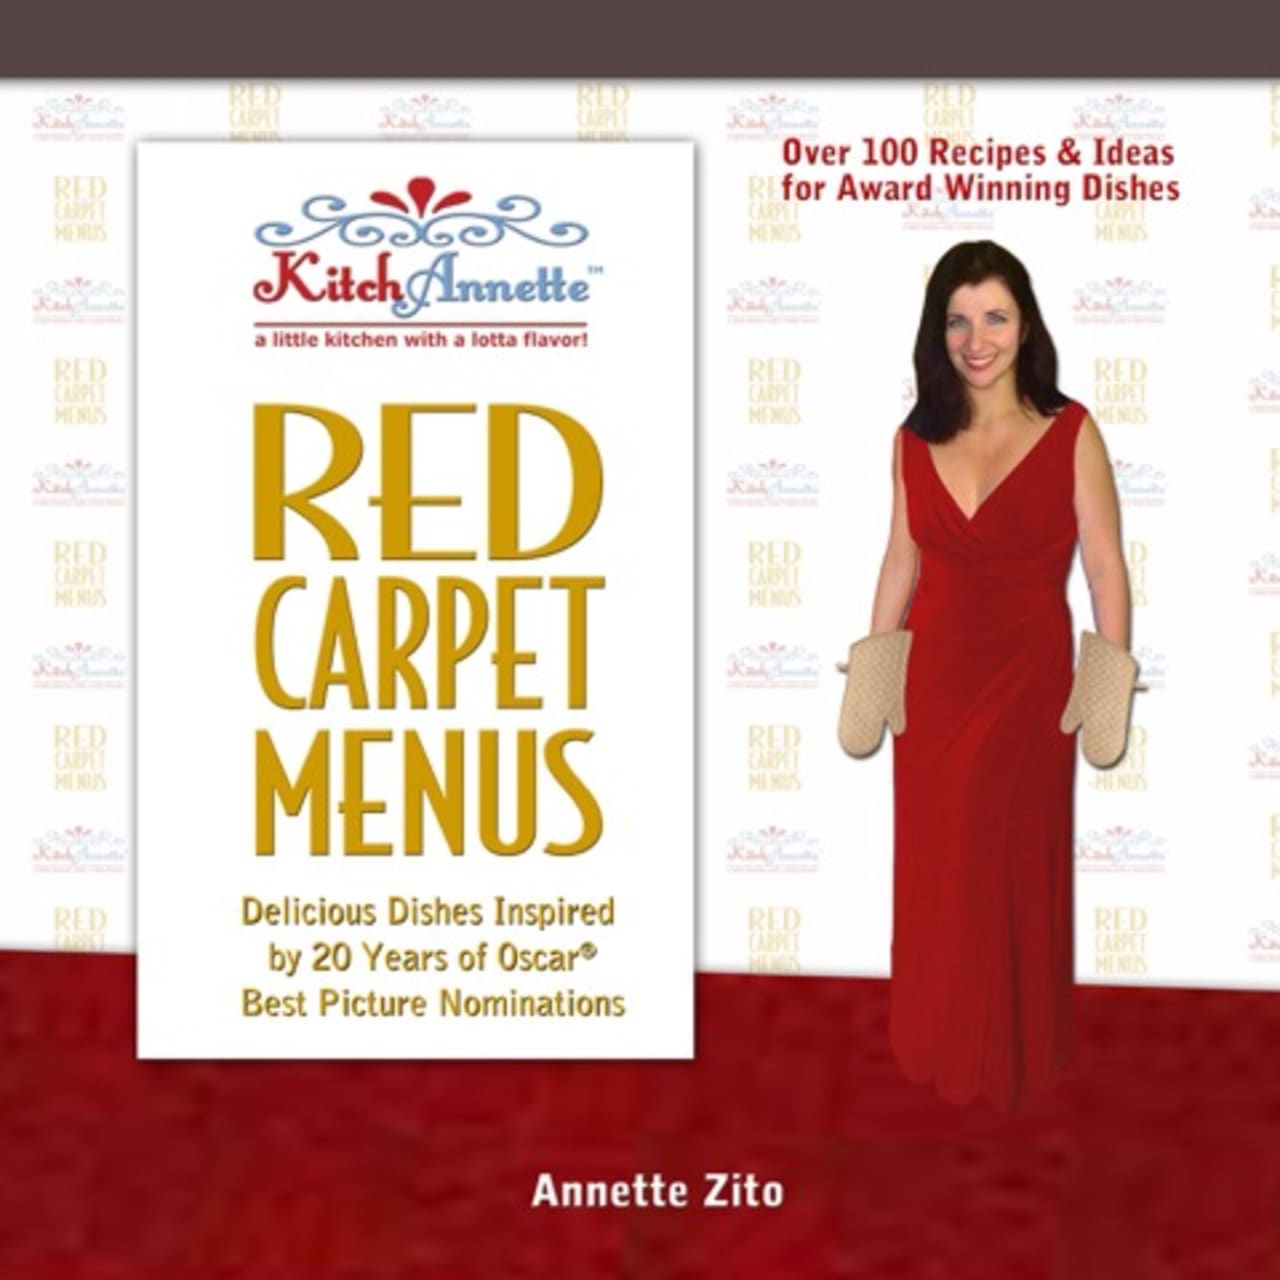 Annette Zito, author of "Red Carpet Menus" has devised a menu specific to this year's Best Picture nominees.